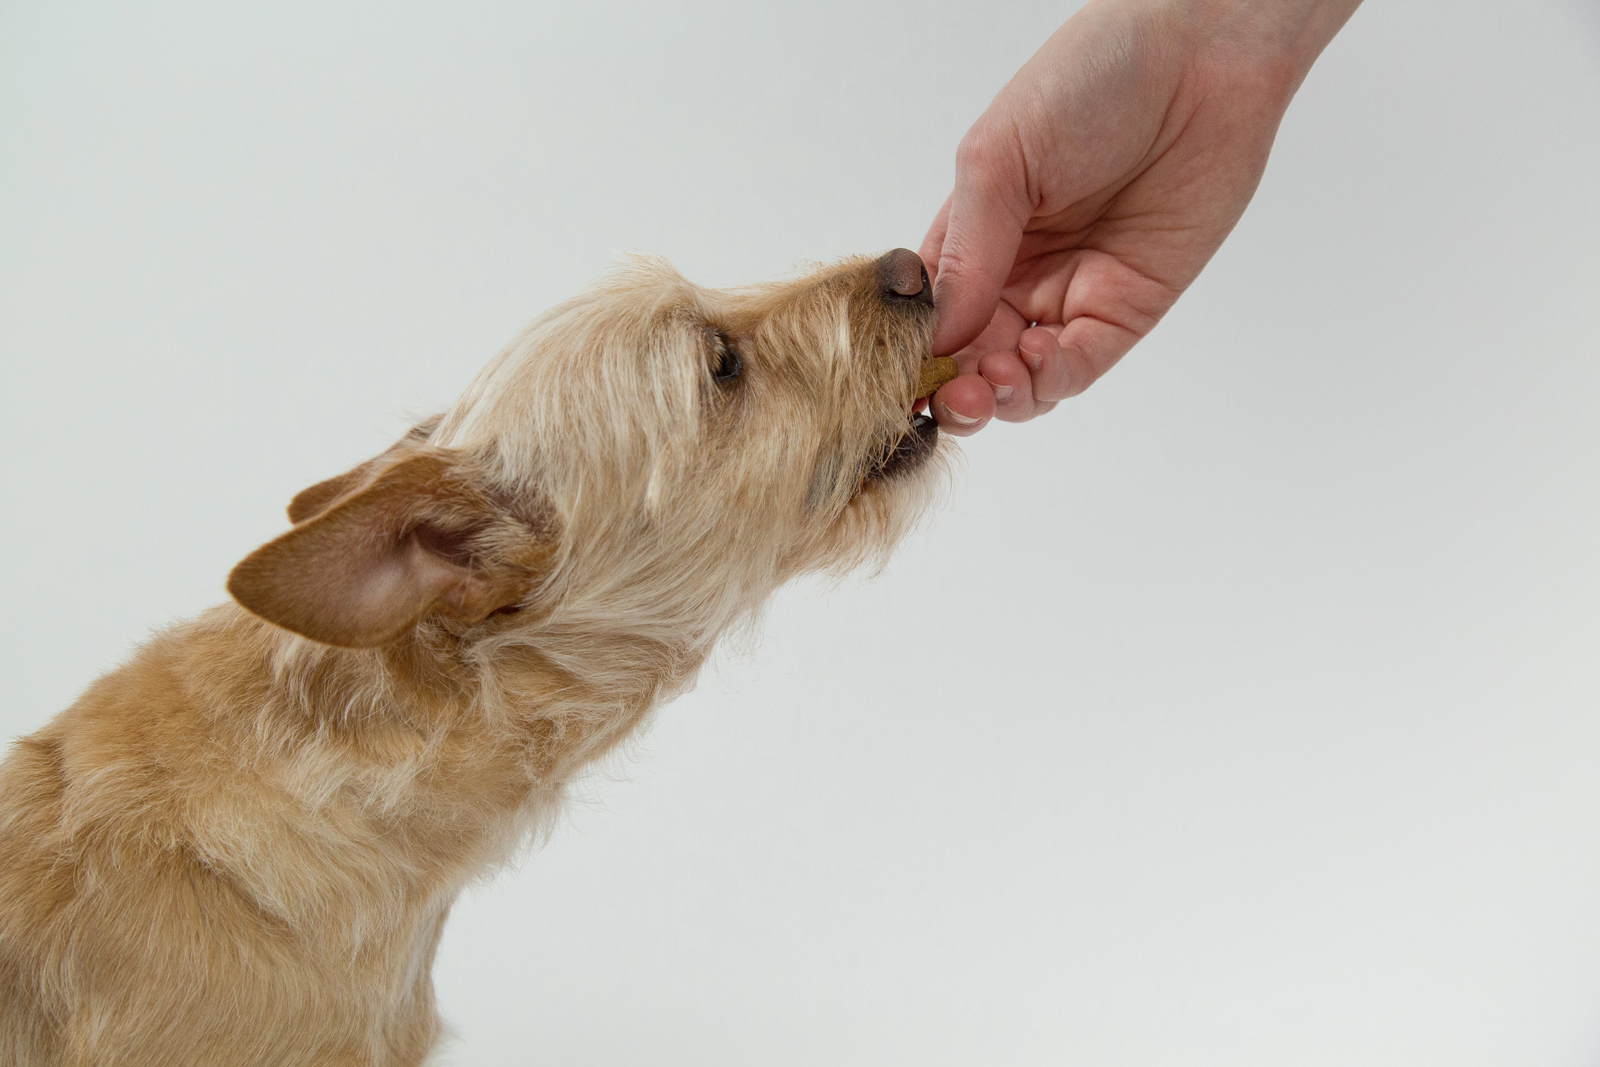 A dog taking a treat from its owner